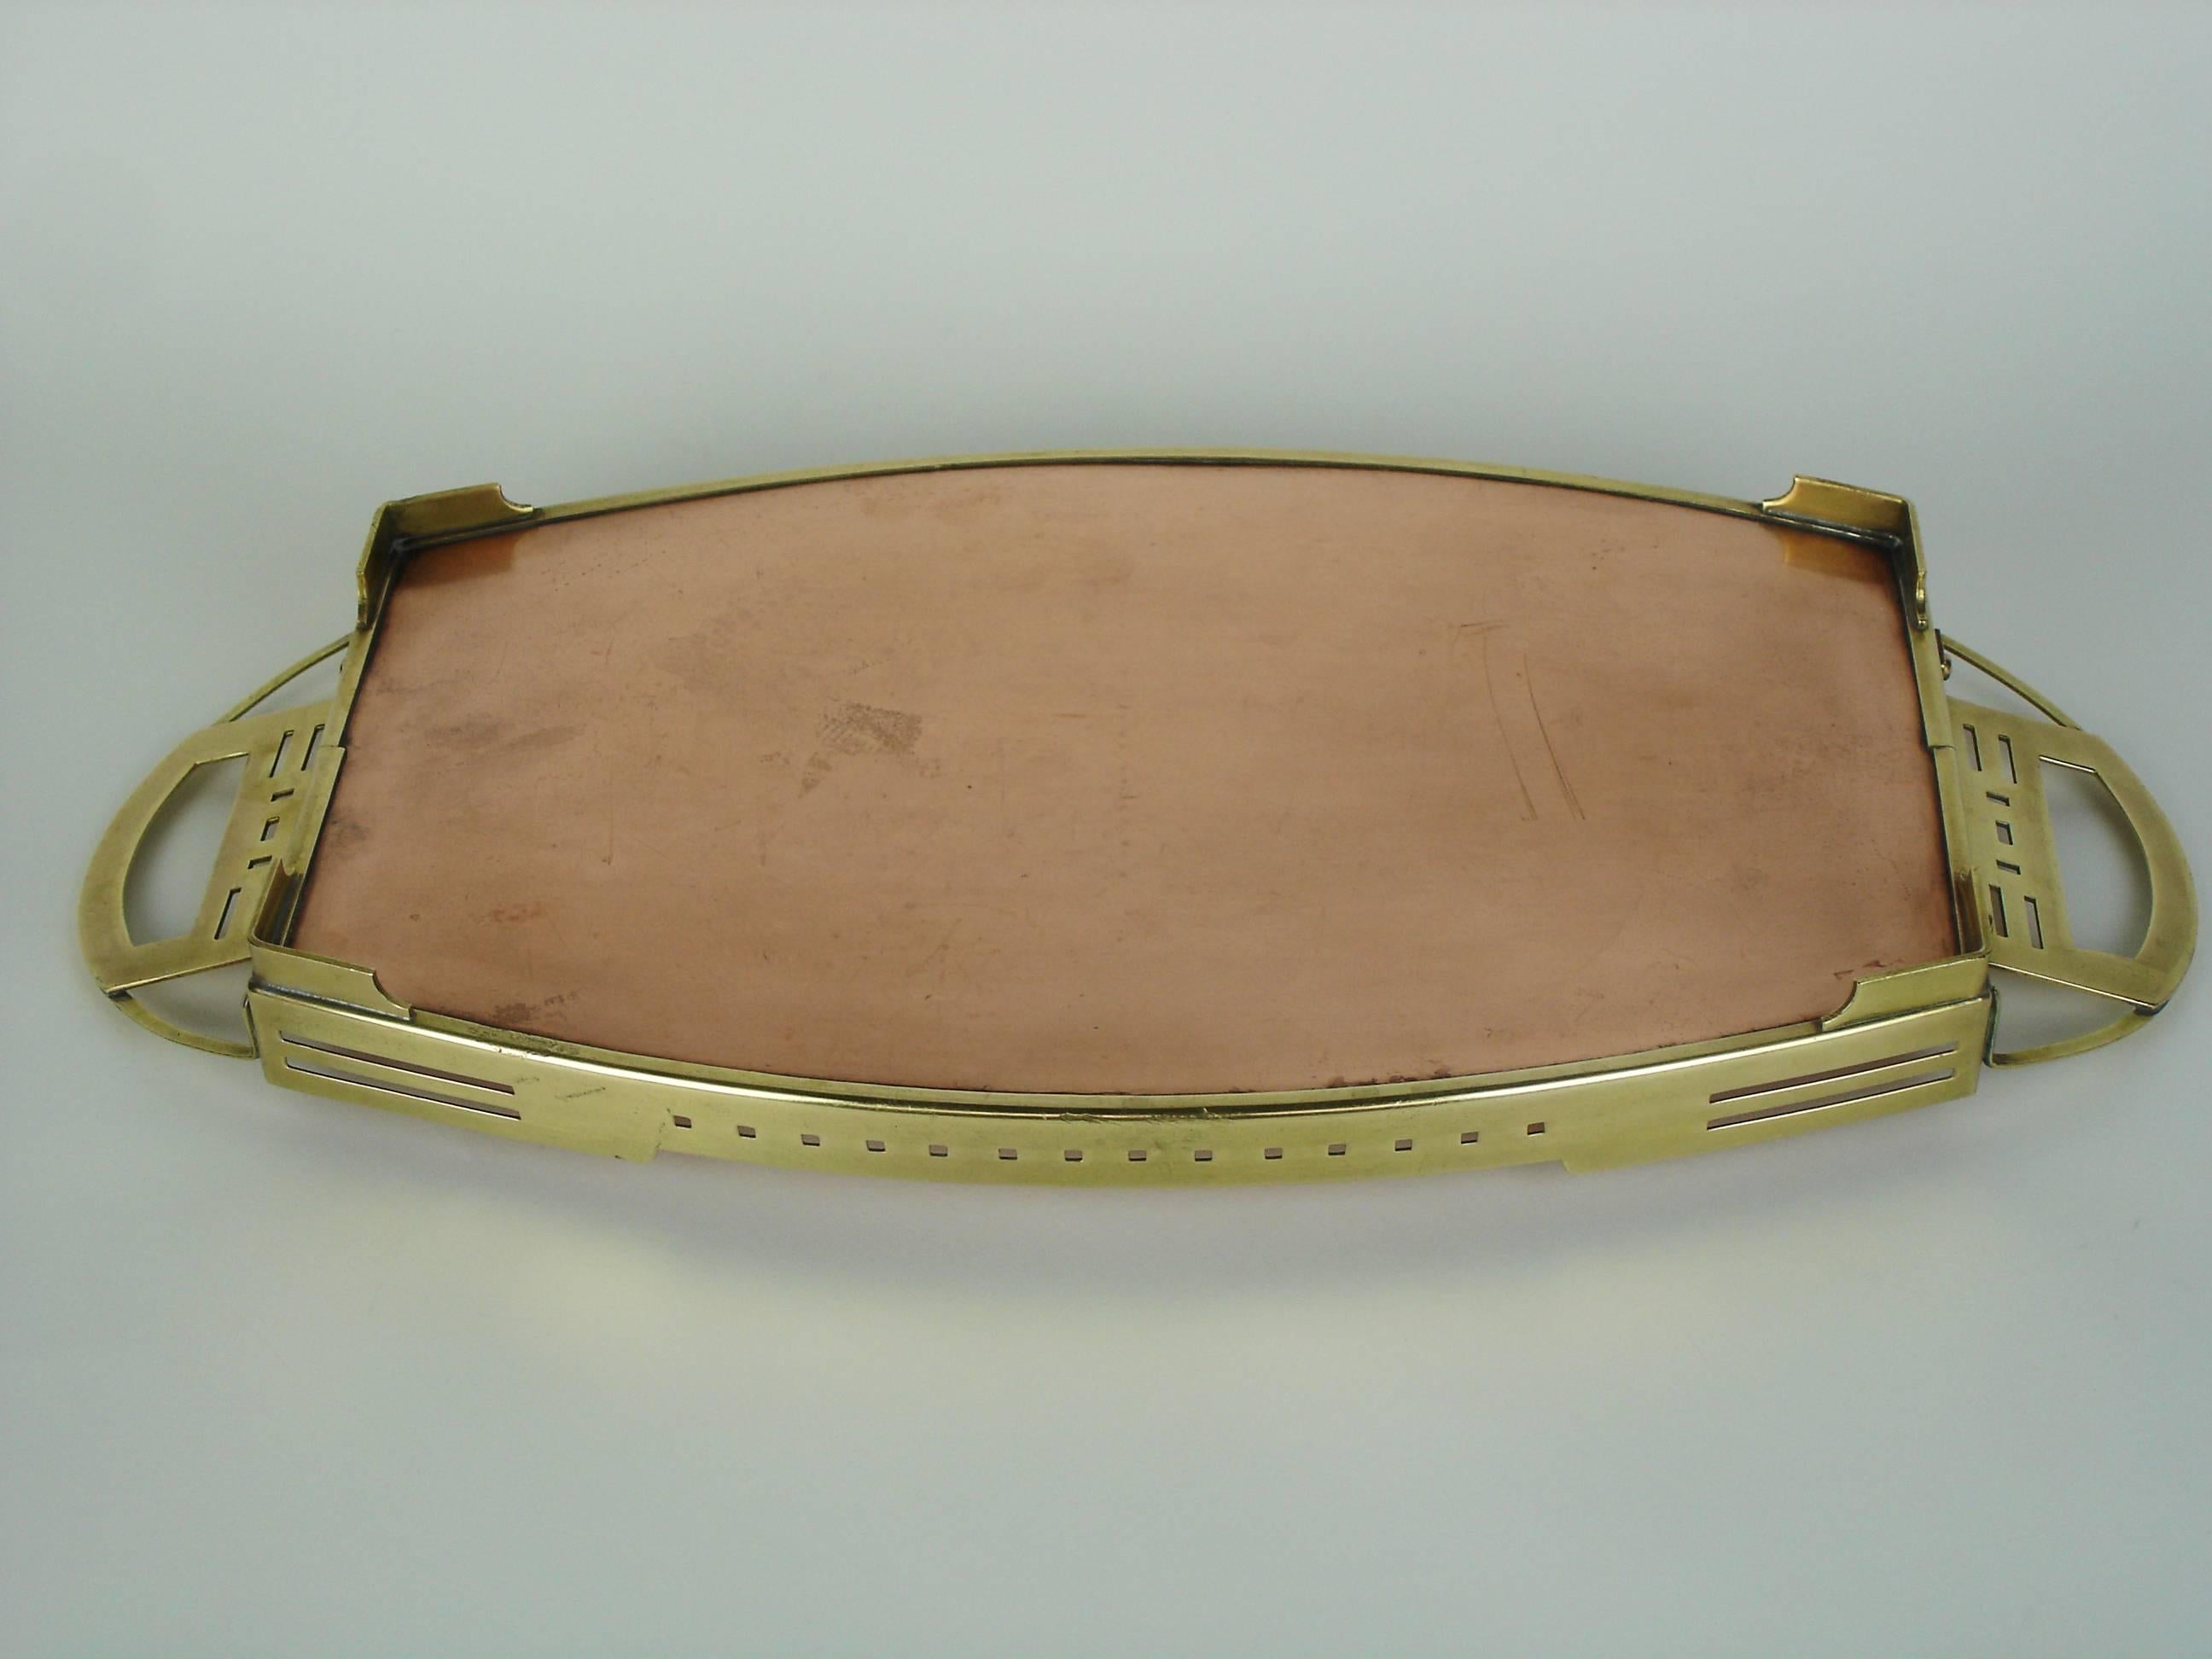 Metalwork 1900s Tray Attributed to Gustave Serrurier Bovy